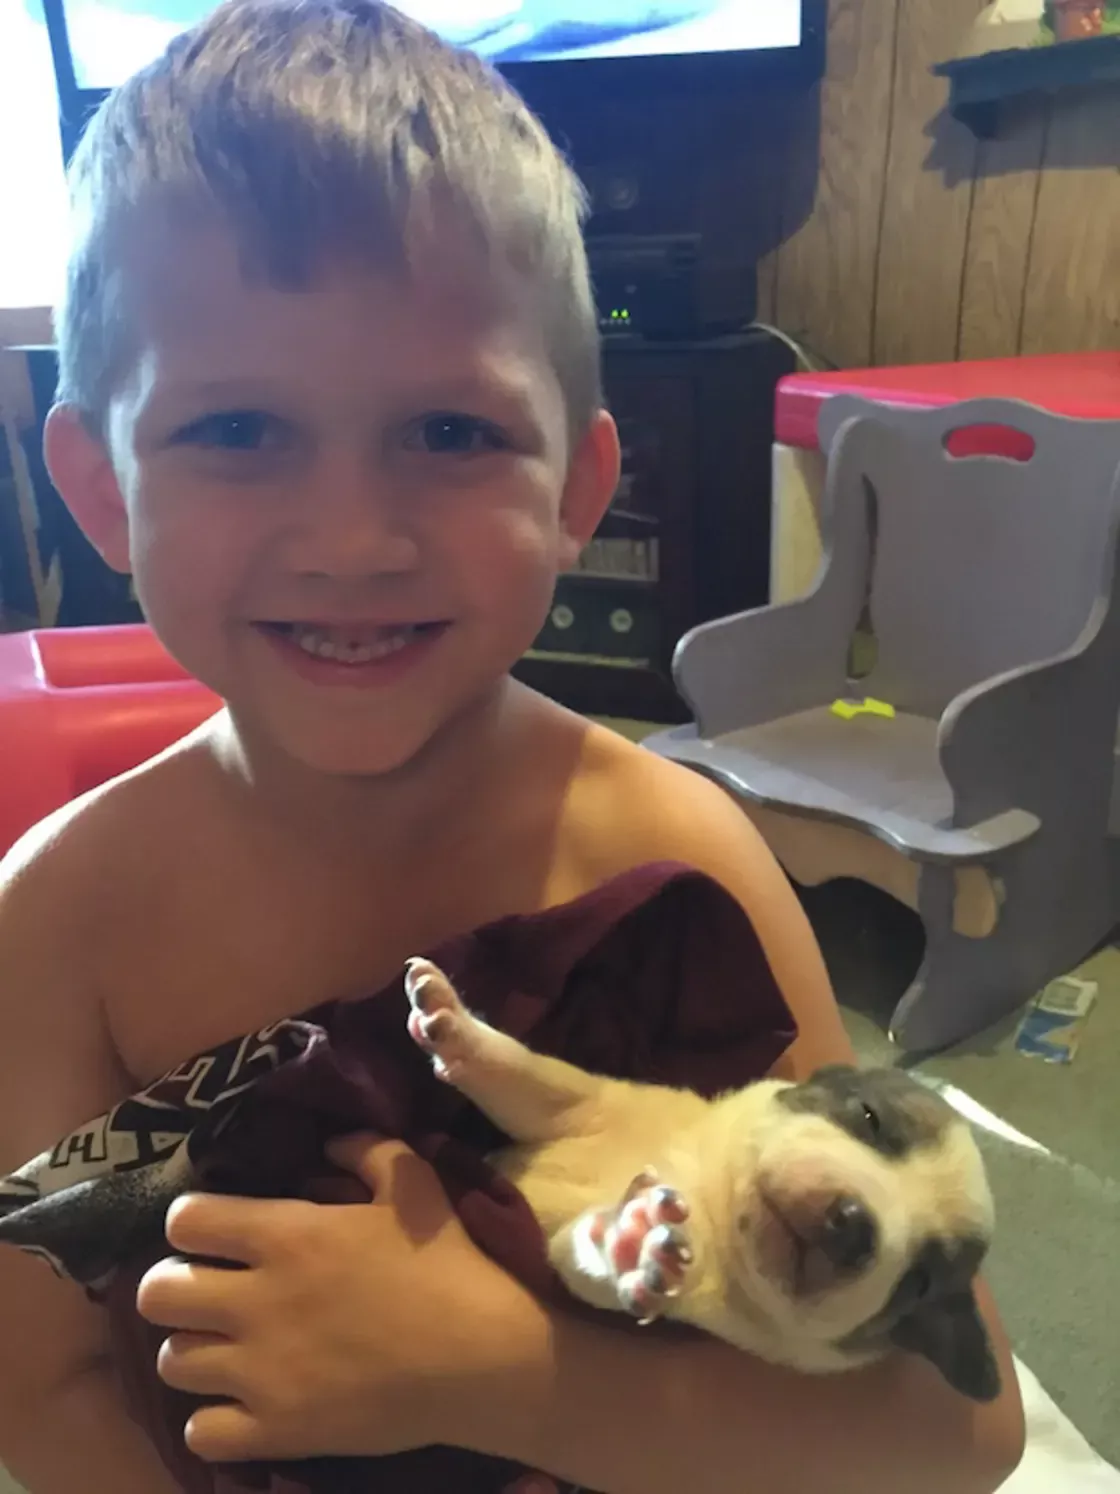 6-year-old boy has tear-jerking reunion with missing dog